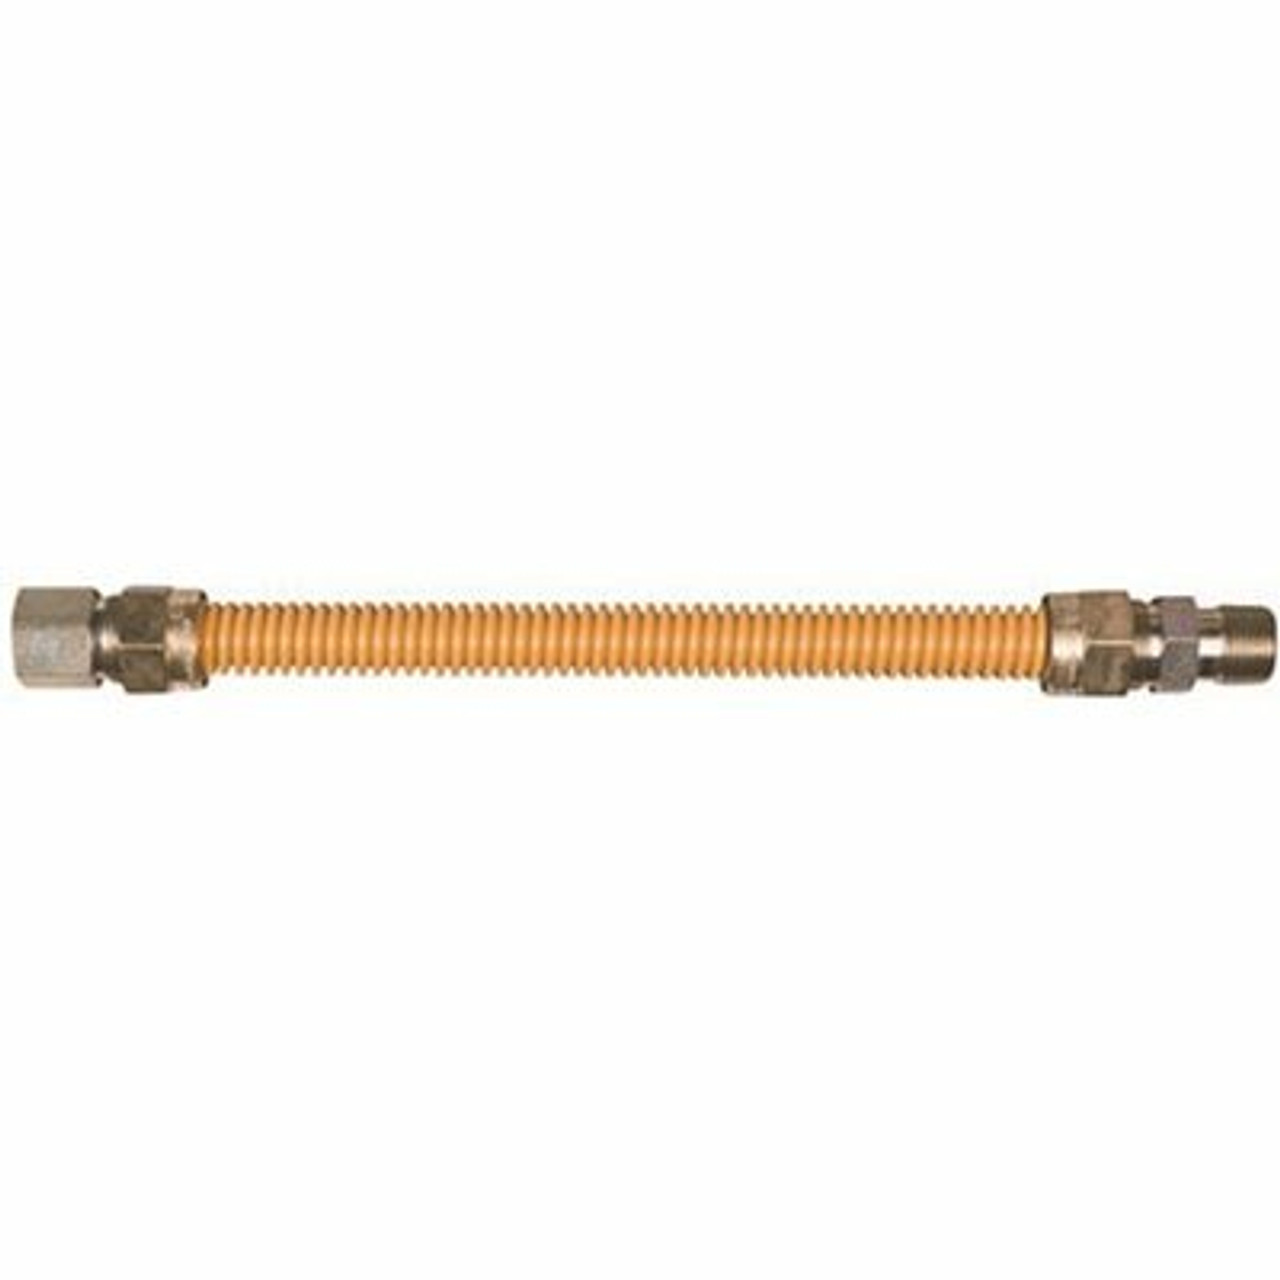 Watts Stainless Steel Gas Appliance Connector, Yellow Coated, 5/8 In. Od, 1/2 In. Id, 1/2 In. Mnpt X 1/2 In. Fnpt, 24 In. L